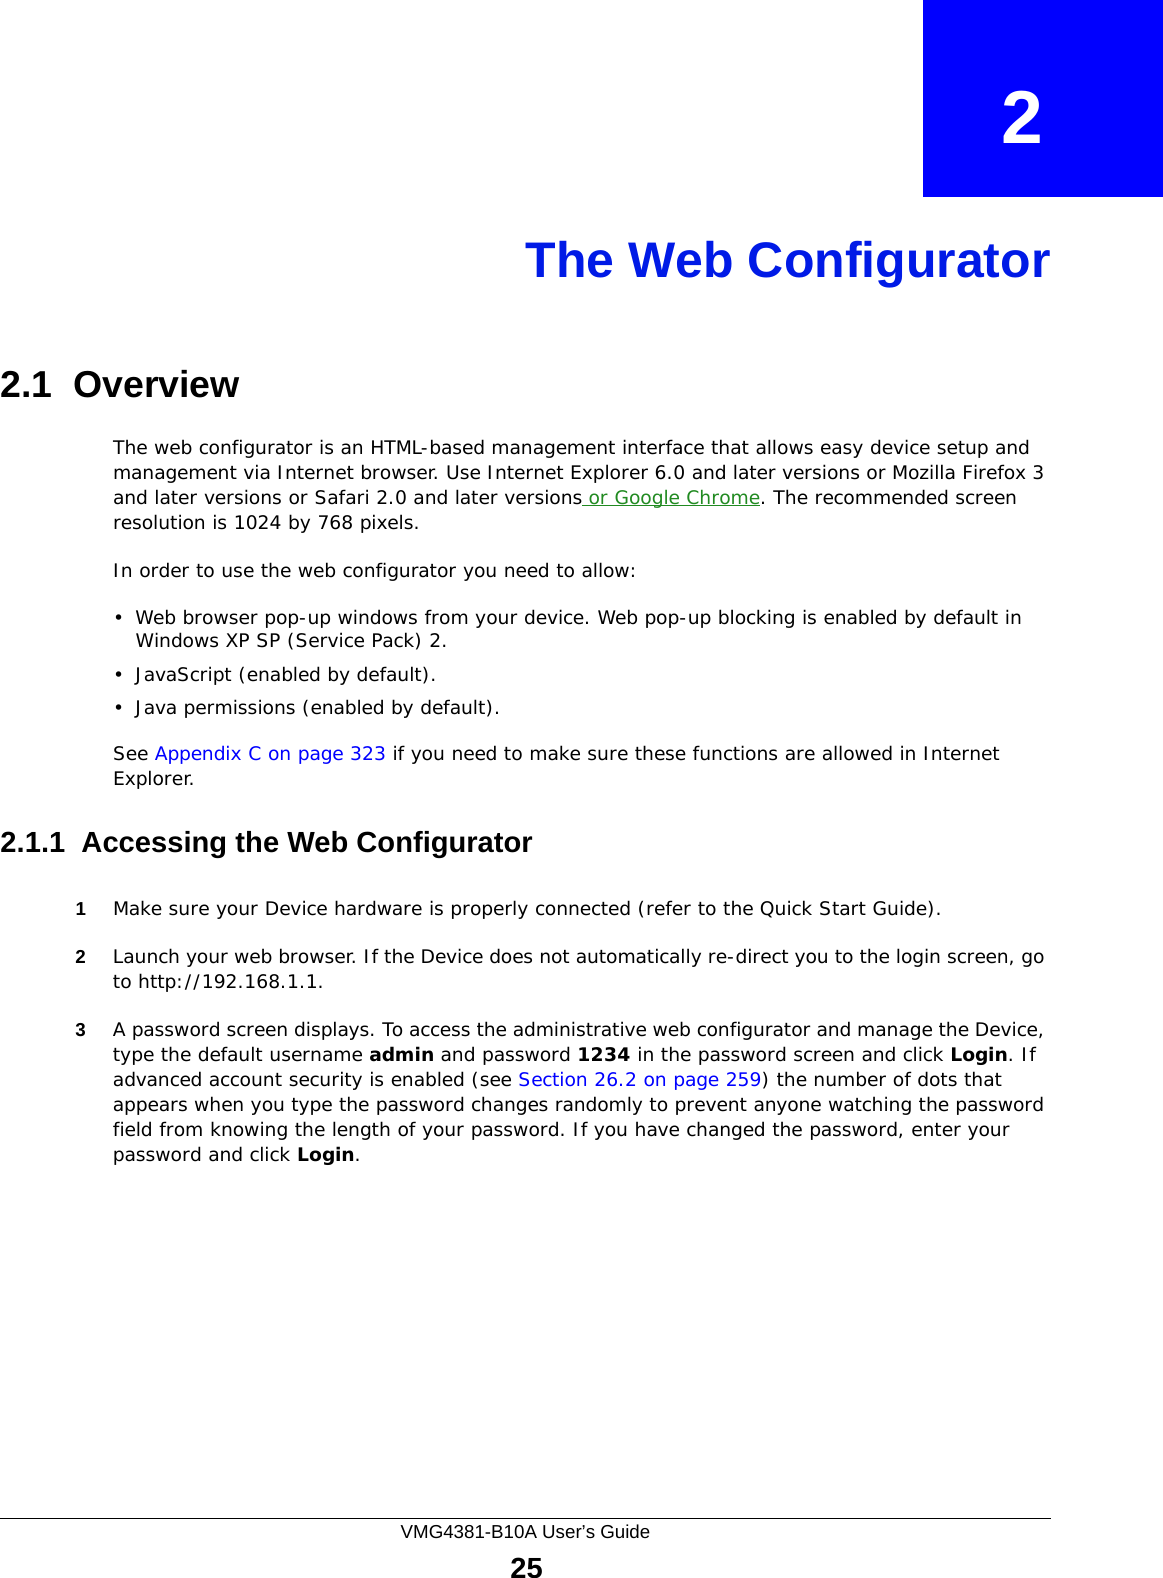 VMG4381-B10A User’s Guide25CHAPTER   2The Web Configurator2.1  OverviewThe web configurator is an HTML-based management interface that allows easy device setup and management via Internet browser. Use Internet Explorer 6.0 and later versions or Mozilla Firefox 3 and later versions or Safari 2.0 and later versions or Google Chrome. The recommended screen resolution is 1024 by 768 pixels.In order to use the web configurator you need to allow:• Web browser pop-up windows from your device. Web pop-up blocking is enabled by default in Windows XP SP (Service Pack) 2.• JavaScript (enabled by default).• Java permissions (enabled by default).See Appendix C on page 323 if you need to make sure these functions are allowed in Internet Explorer. 2.1.1  Accessing the Web Configurator1Make sure your Device hardware is properly connected (refer to the Quick Start Guide).2Launch your web browser. If the Device does not automatically re-direct you to the login screen, go to http://192.168.1.1.3A password screen displays. To access the administrative web configurator and manage the Device, type the default username admin and password 1234 in the password screen and click Login. If advanced account security is enabled (see Section 26.2 on page 259) the number of dots that appears when you type the password changes randomly to prevent anyone watching the password field from knowing the length of your password. If you have changed the password, enter your password and click Login. 